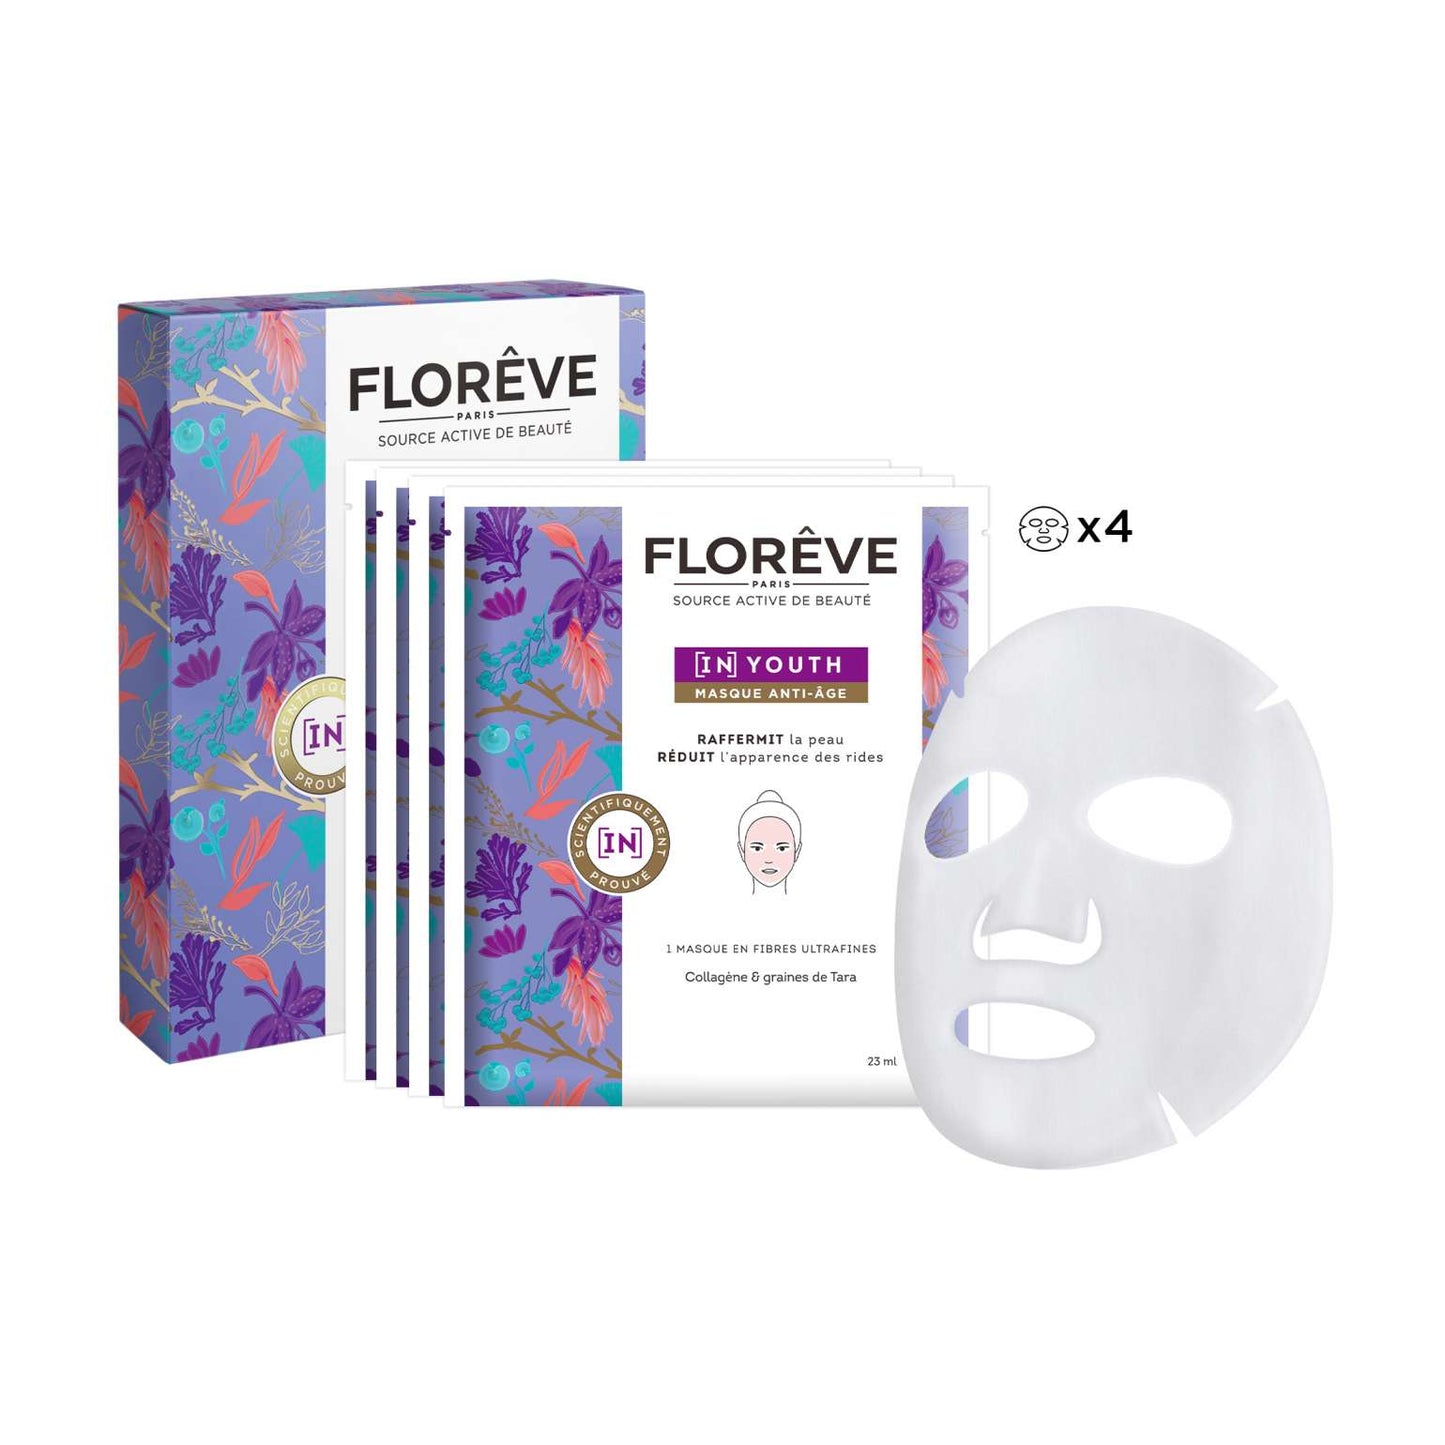 Florêve [IN] Youth Anti Aging Mask